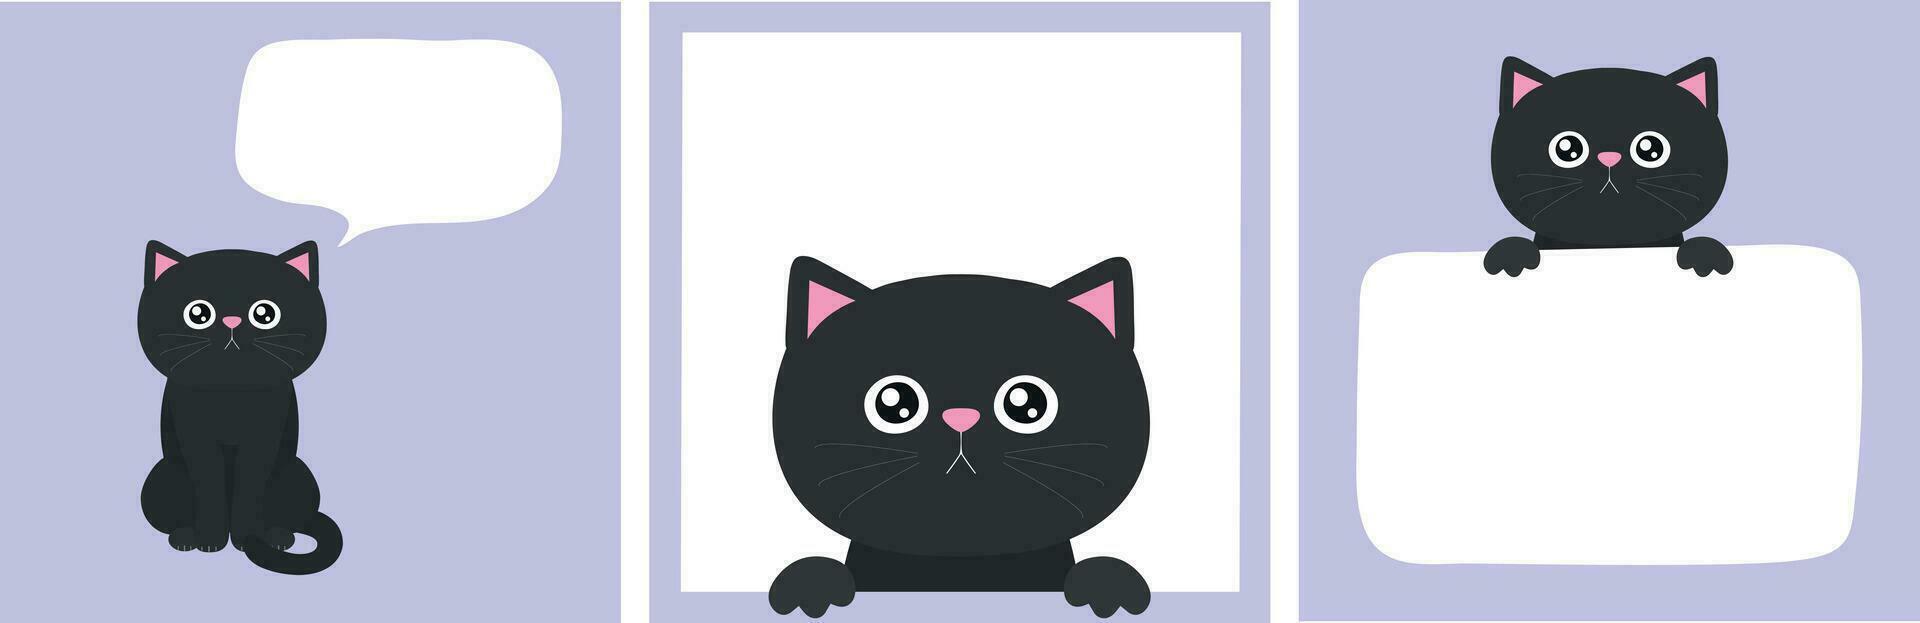 Cute black kitten set in frame with copy space. Black cat holding empty paper. Cat with a speech bubble. Kawaii cartoon character with whiskers and paws. Vector art